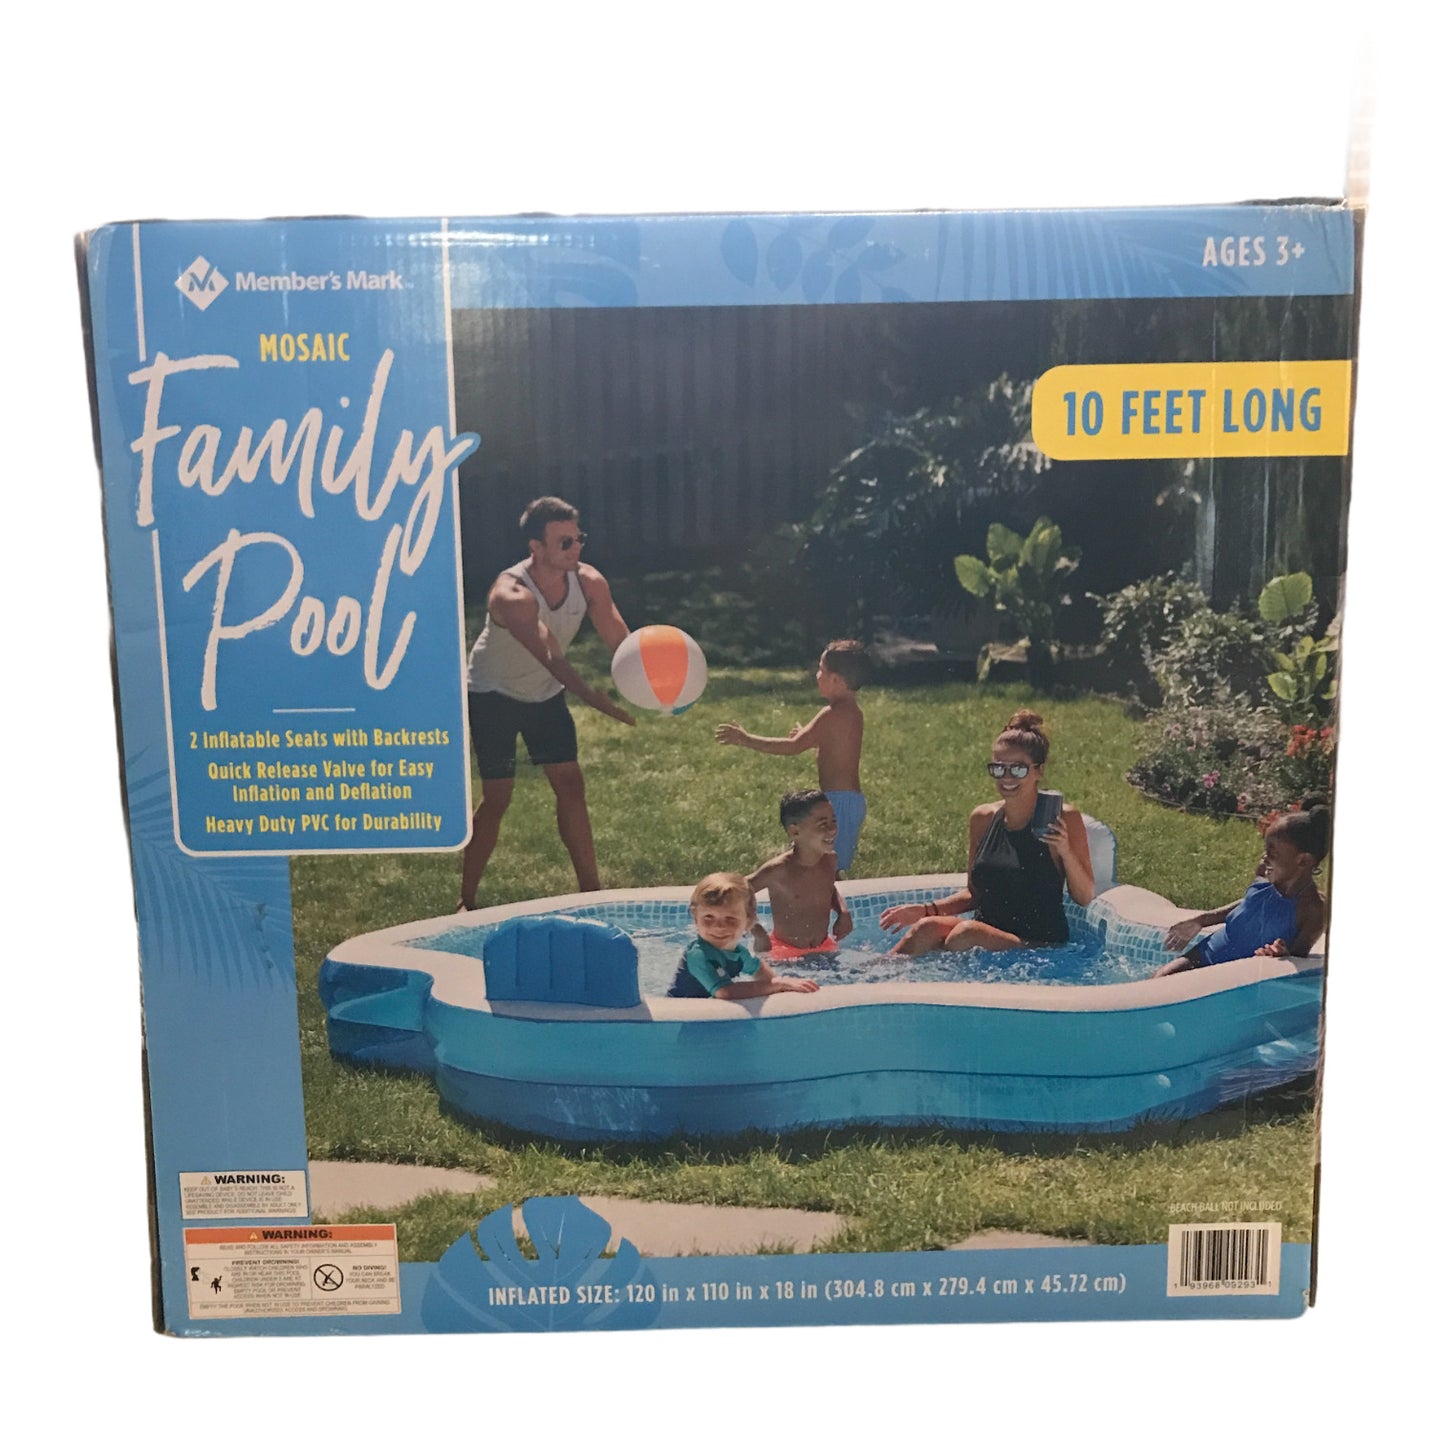 Elegant Family Pool 10 Feet Long 2 Inflatable Seats with Backrests